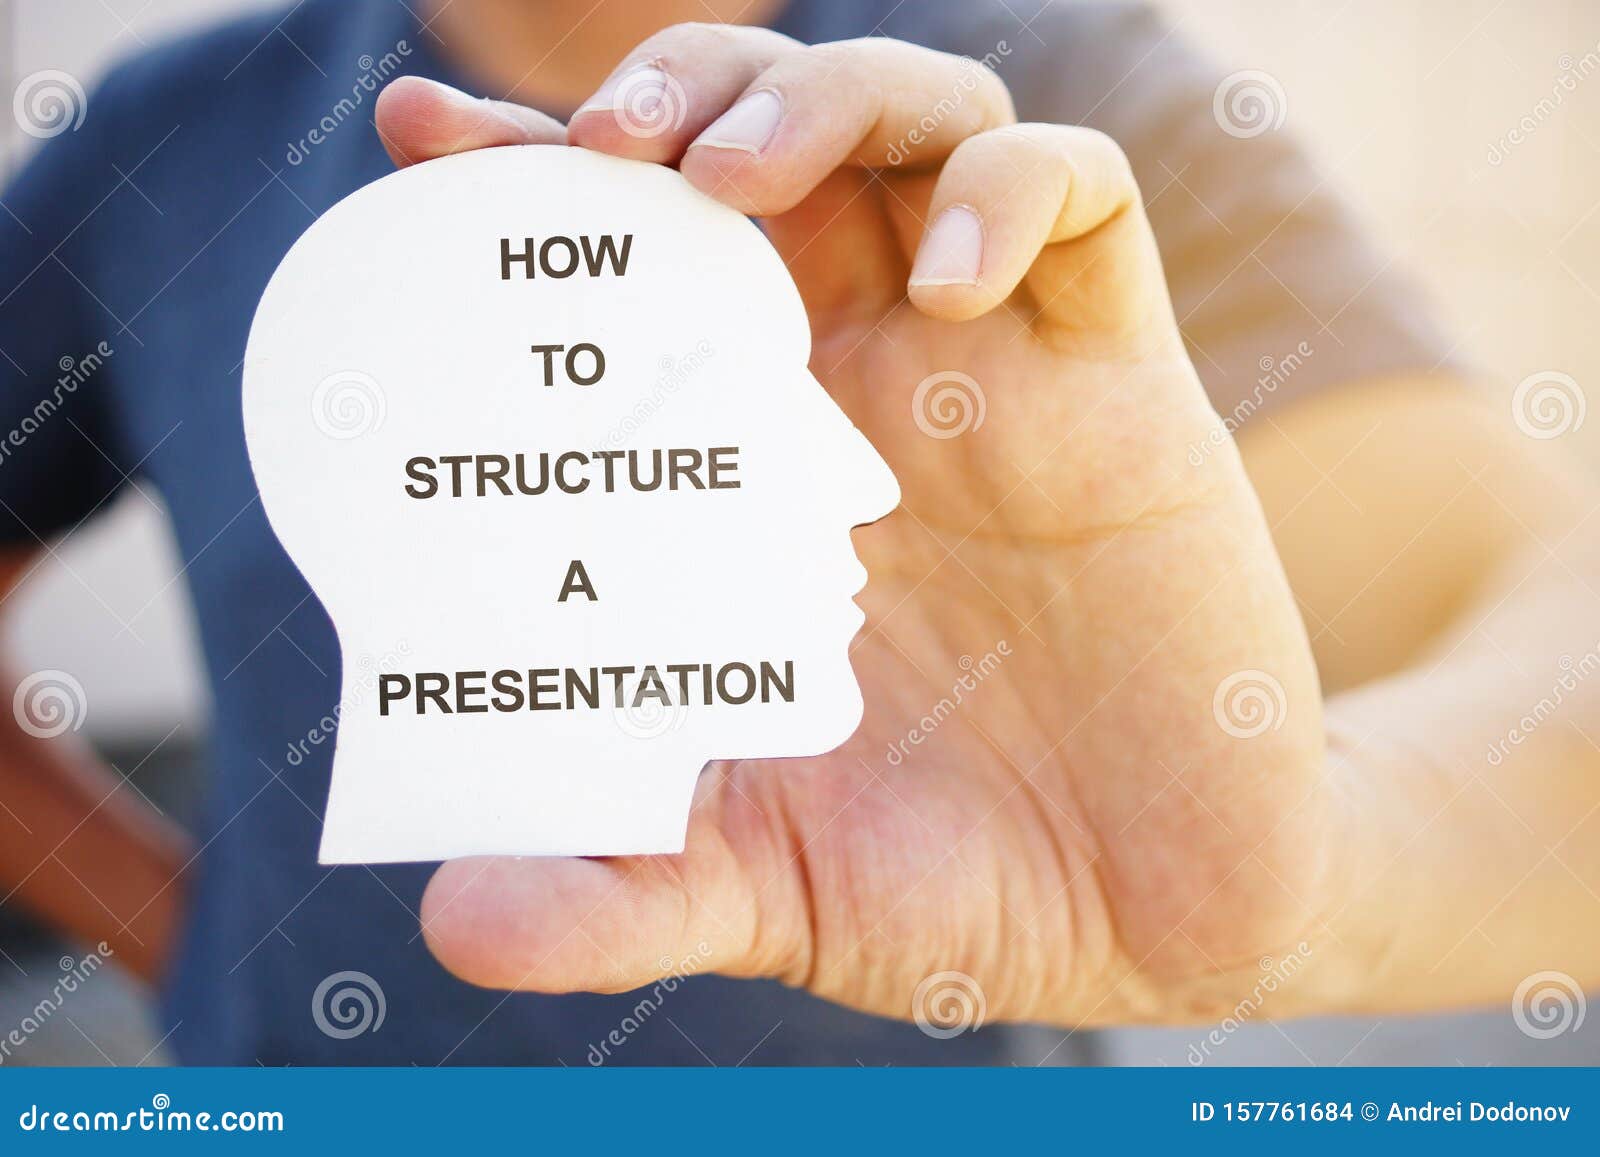 the arrangement and presentation of the text is known as